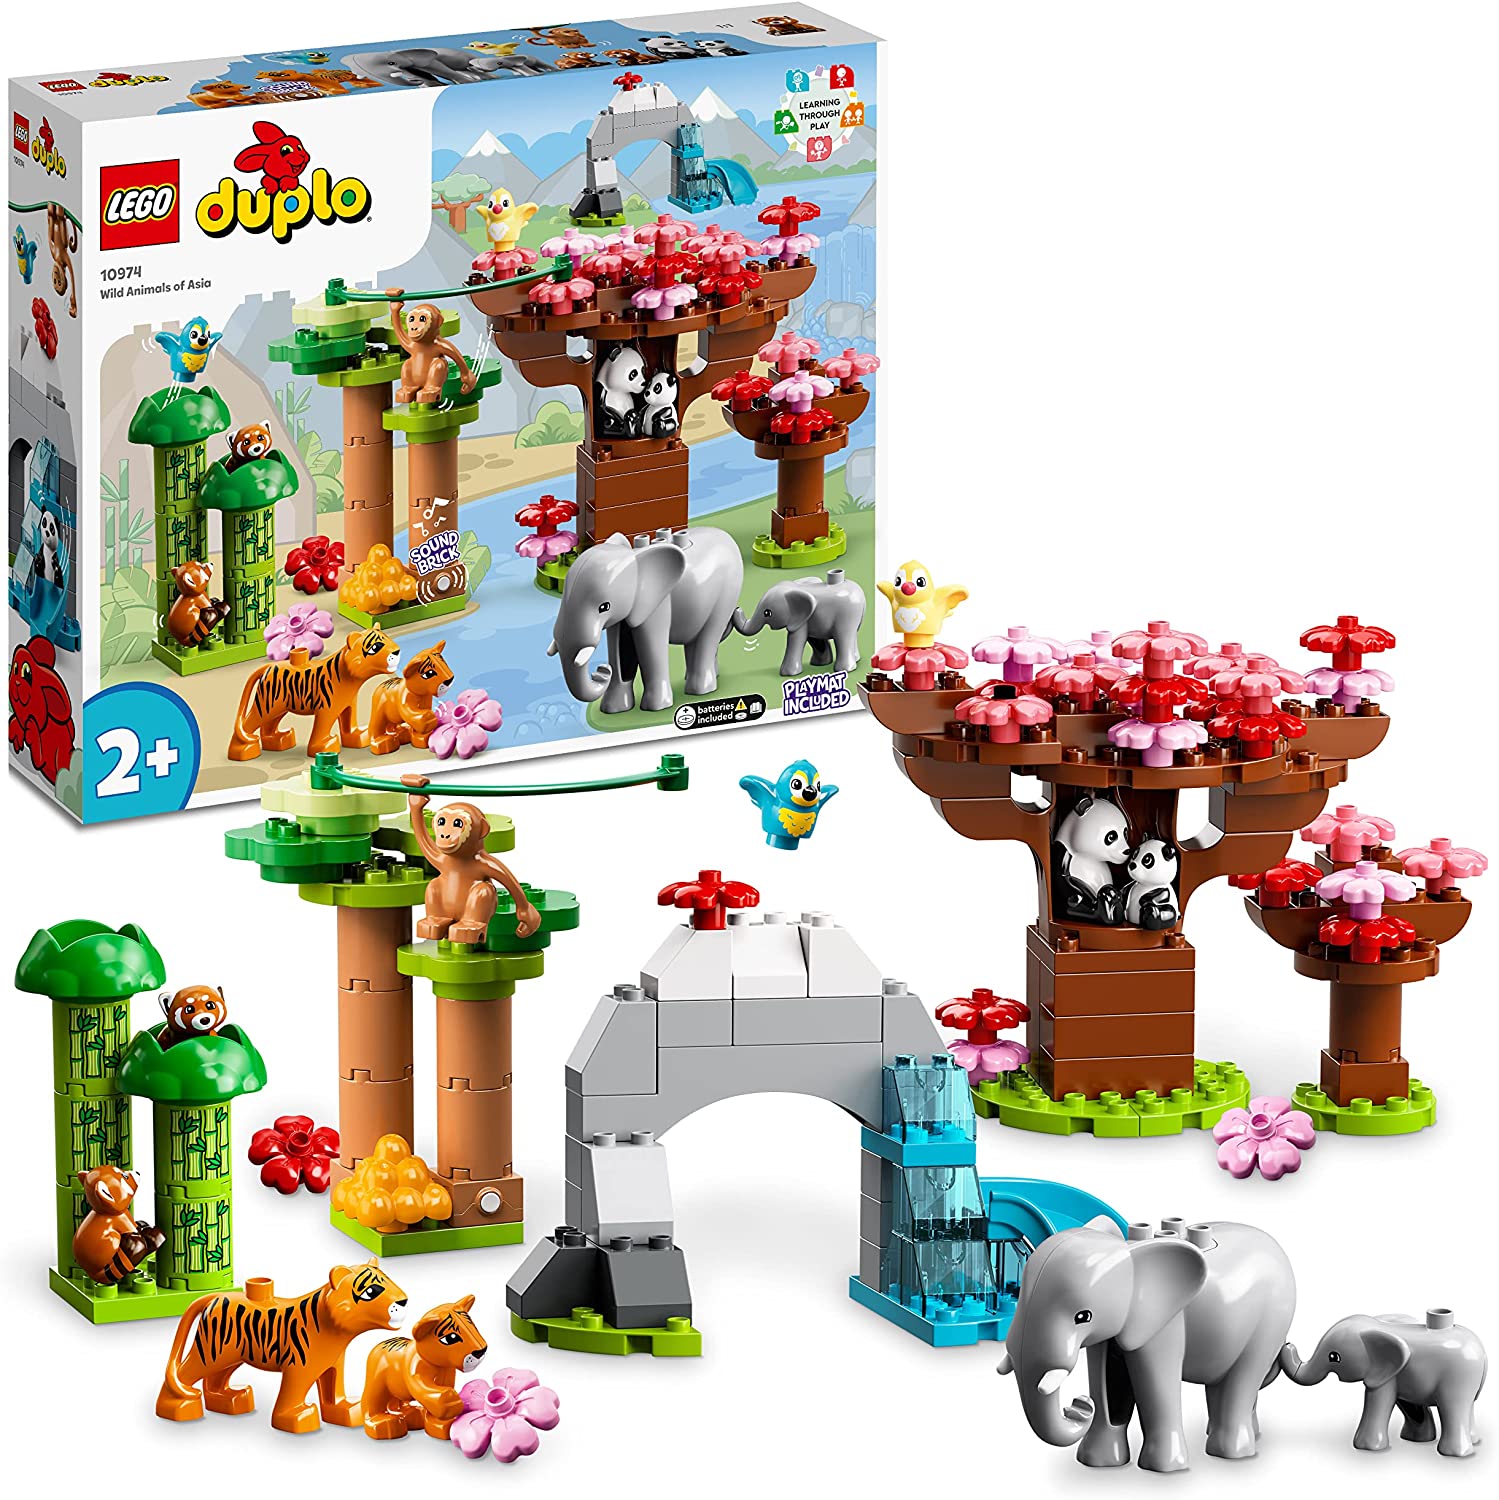 LEGO 10974 DUPLO Wild Animals Asia Toy Set with Sound, with Animal Figures and Stones for Toddlers from 2-5 Years with Play Mat